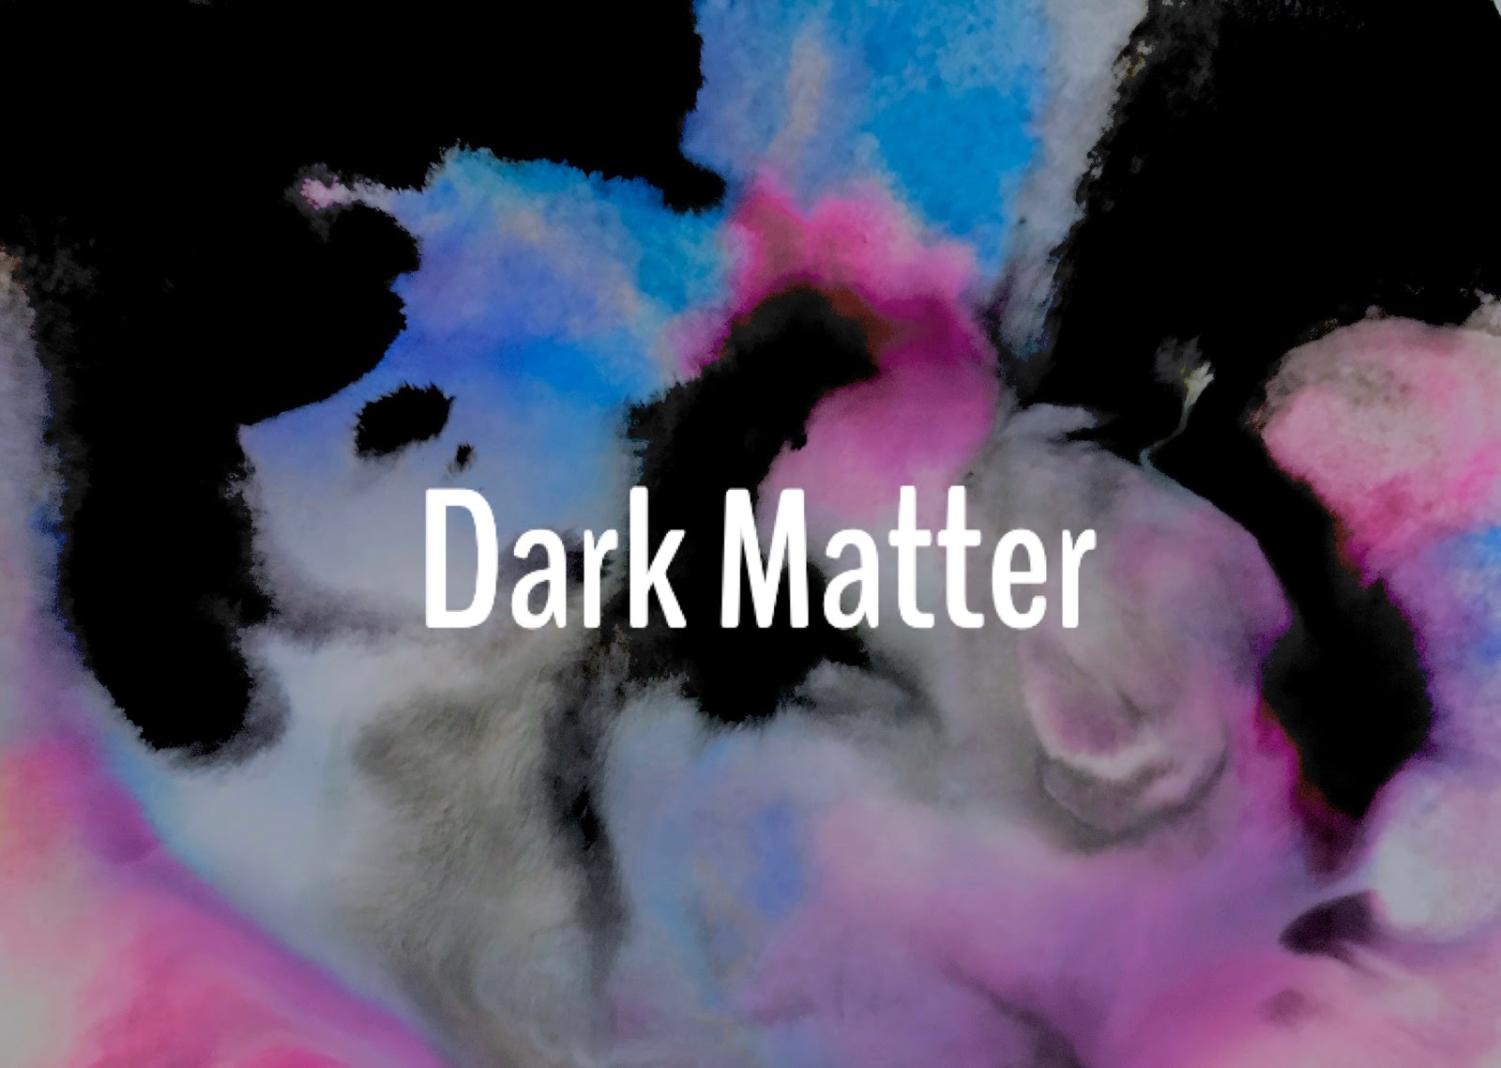 Dark matter plays a role in the universe that is unknown to many.